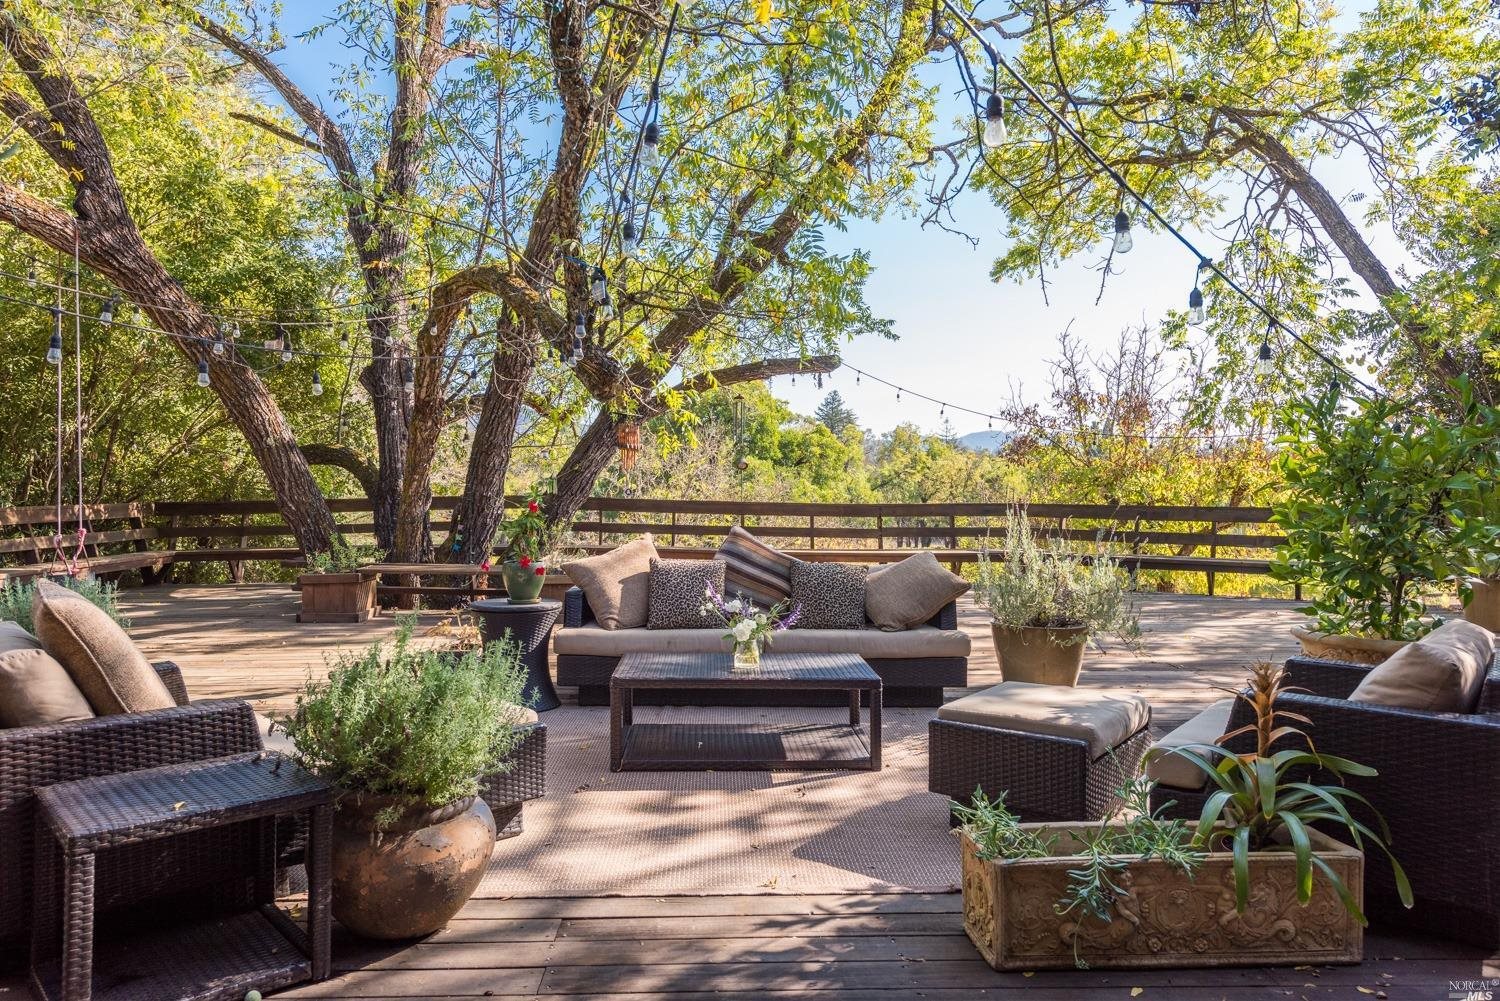 a outdoor living space with patio and furniture